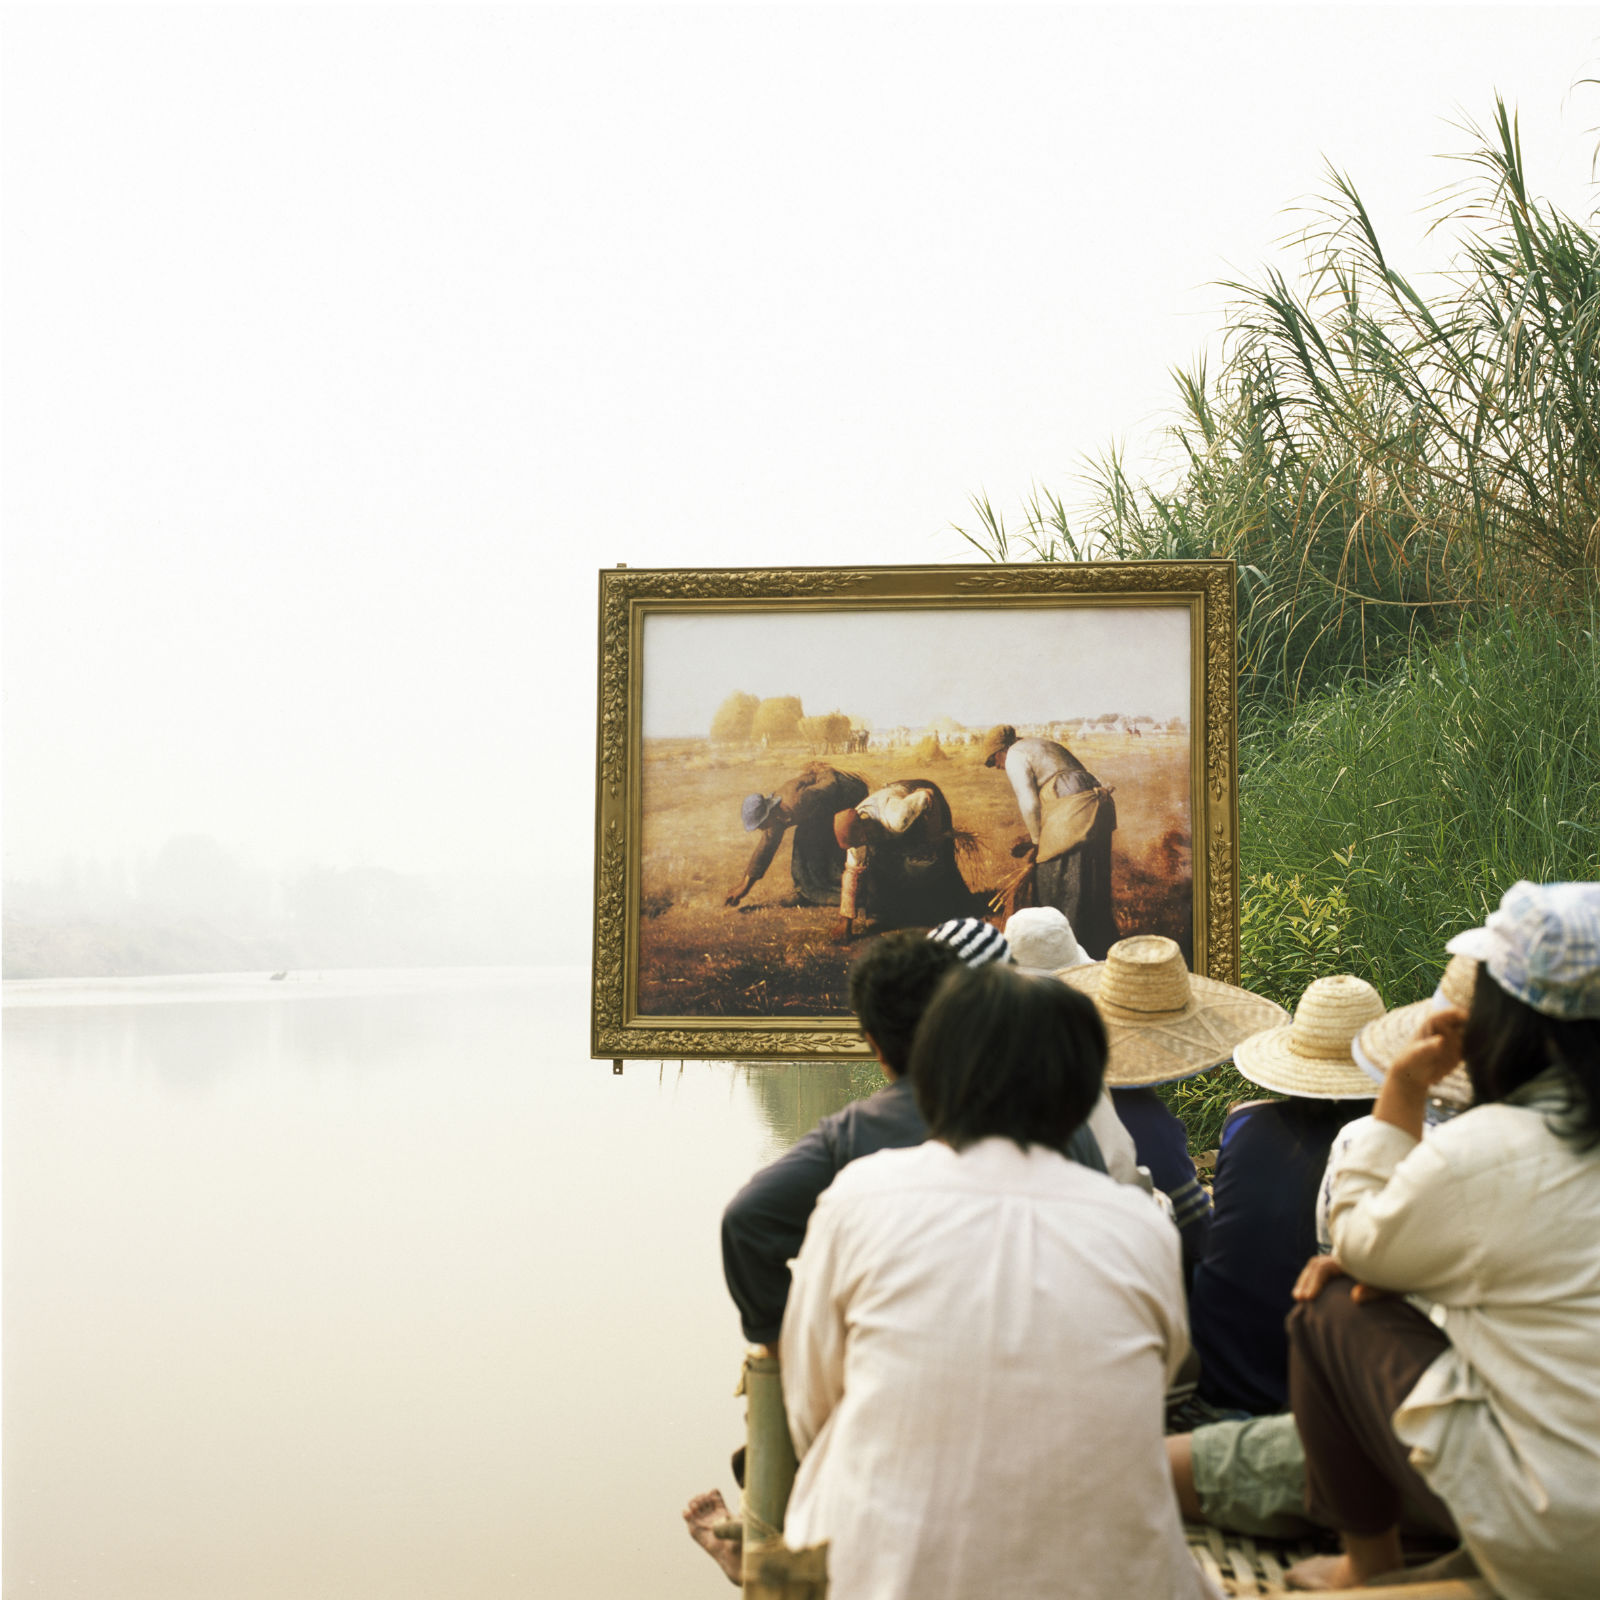 Image of artwork Two Planets: Millet’s The Gleaners and the Thai Farmers by Araya Rasjarmrearnsook